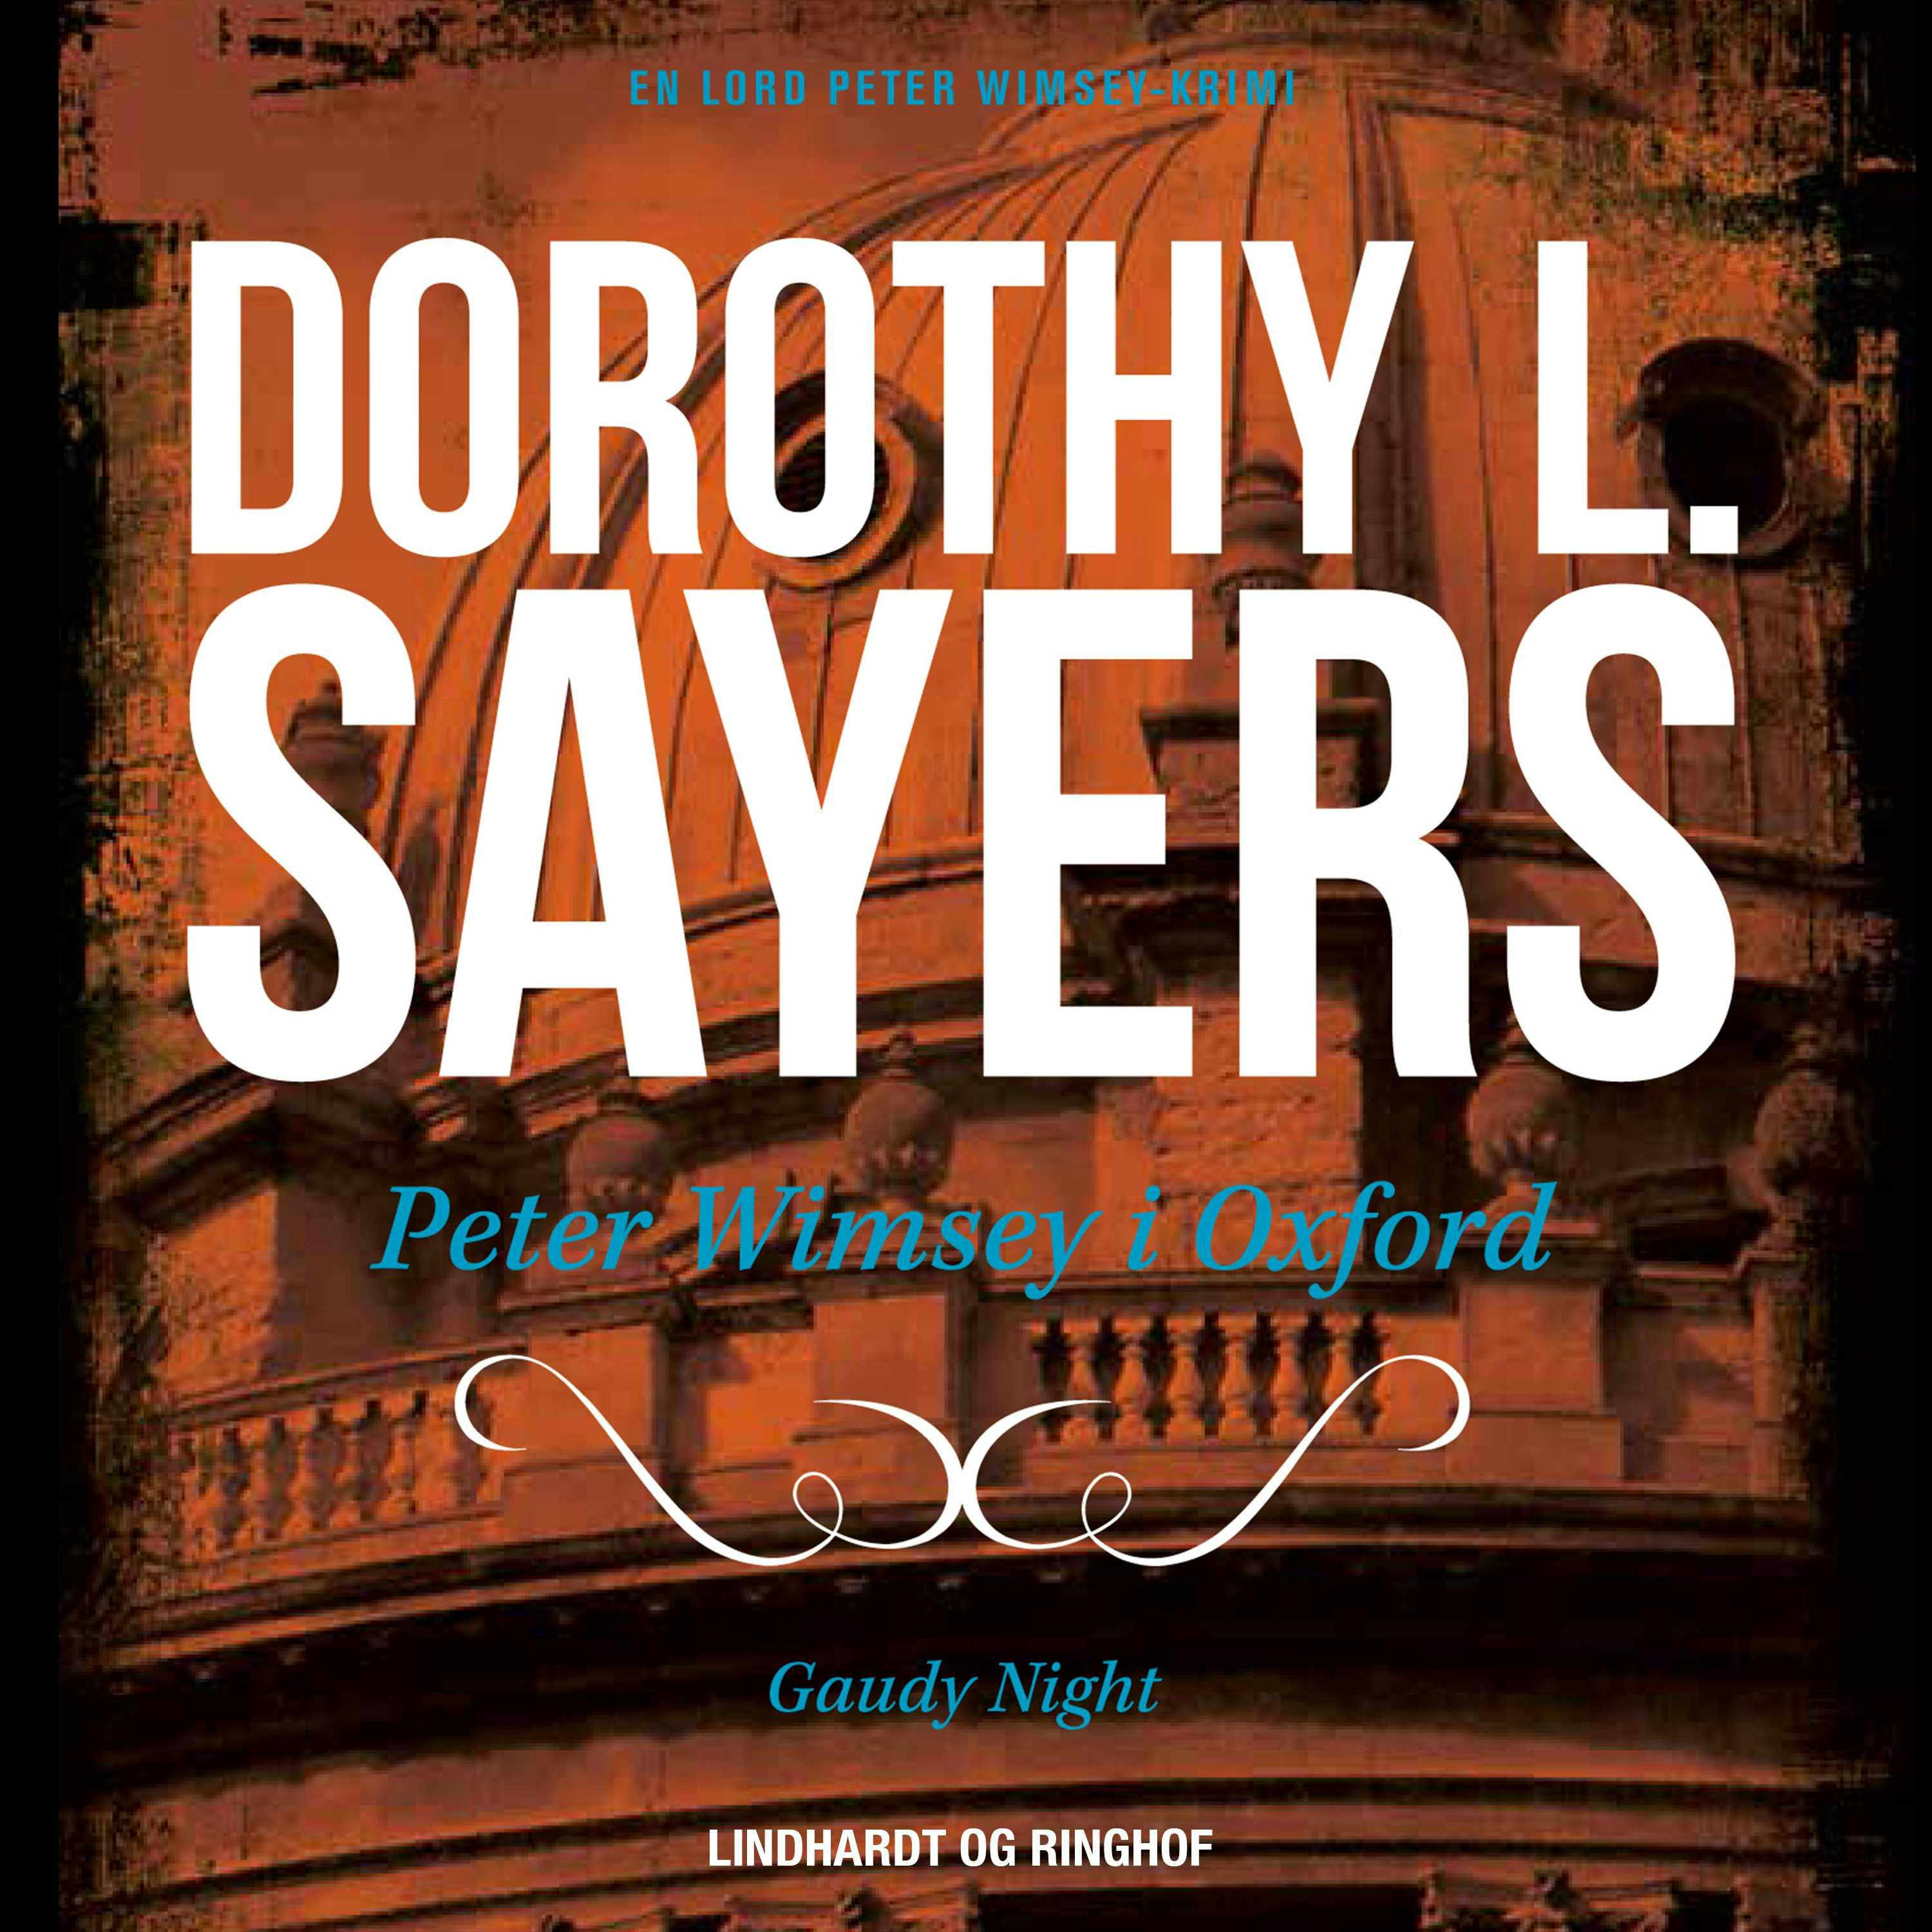 Peter Wimsey i Oxford - Dorothy L. Sayers